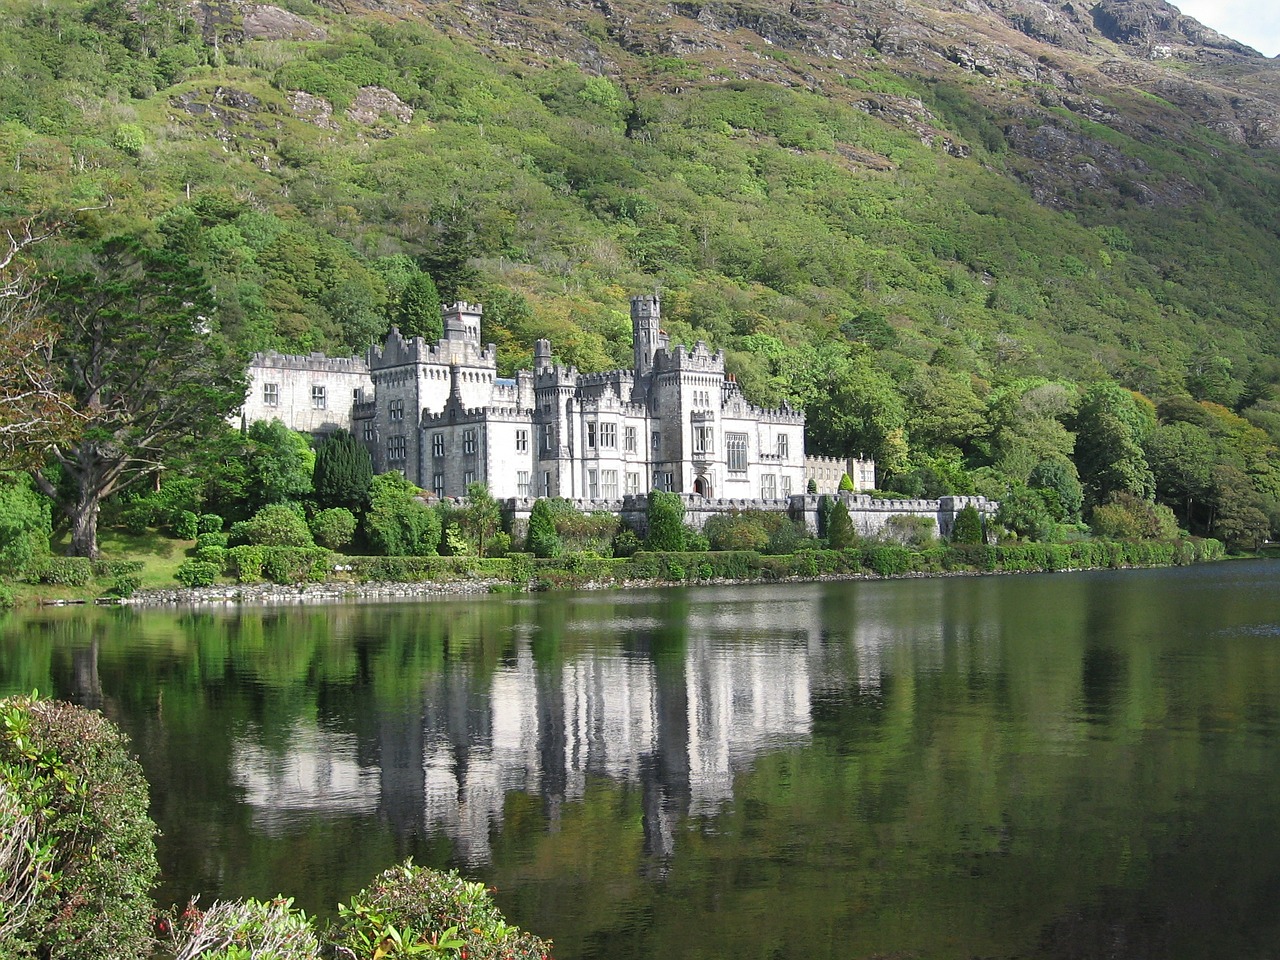 kylemore abbey monastery county galway free photo